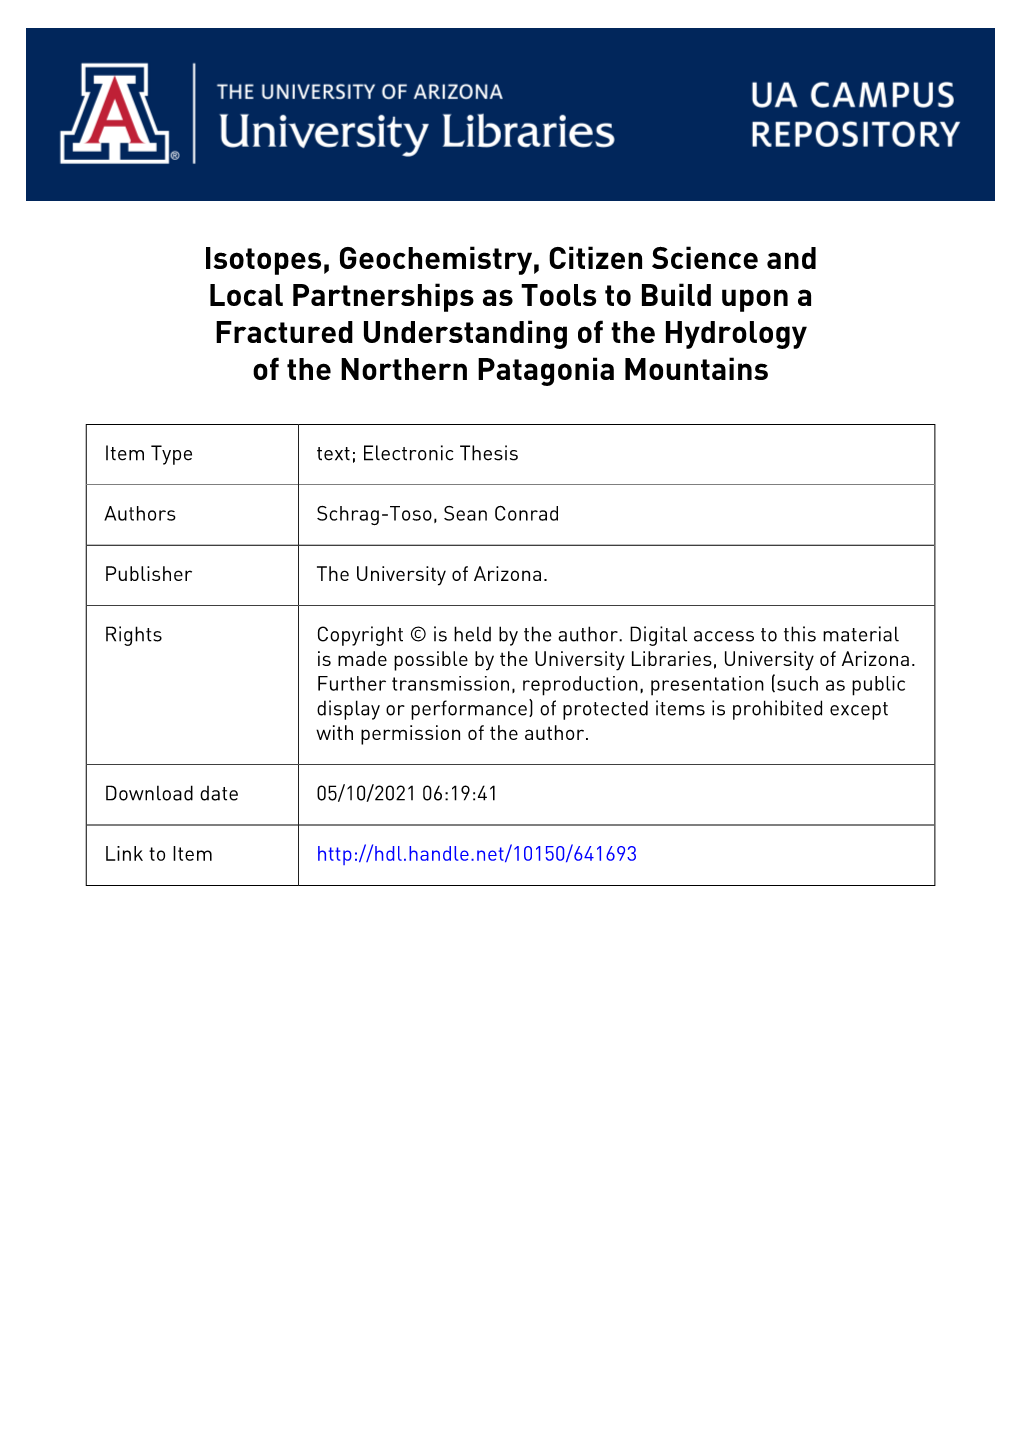 Isotopes, Geochemistry, Citizen Science and Local Partnerships As Tools to Build Upon a Fractured Understanding of the Hydrology of the Northern Patagonia Mountains